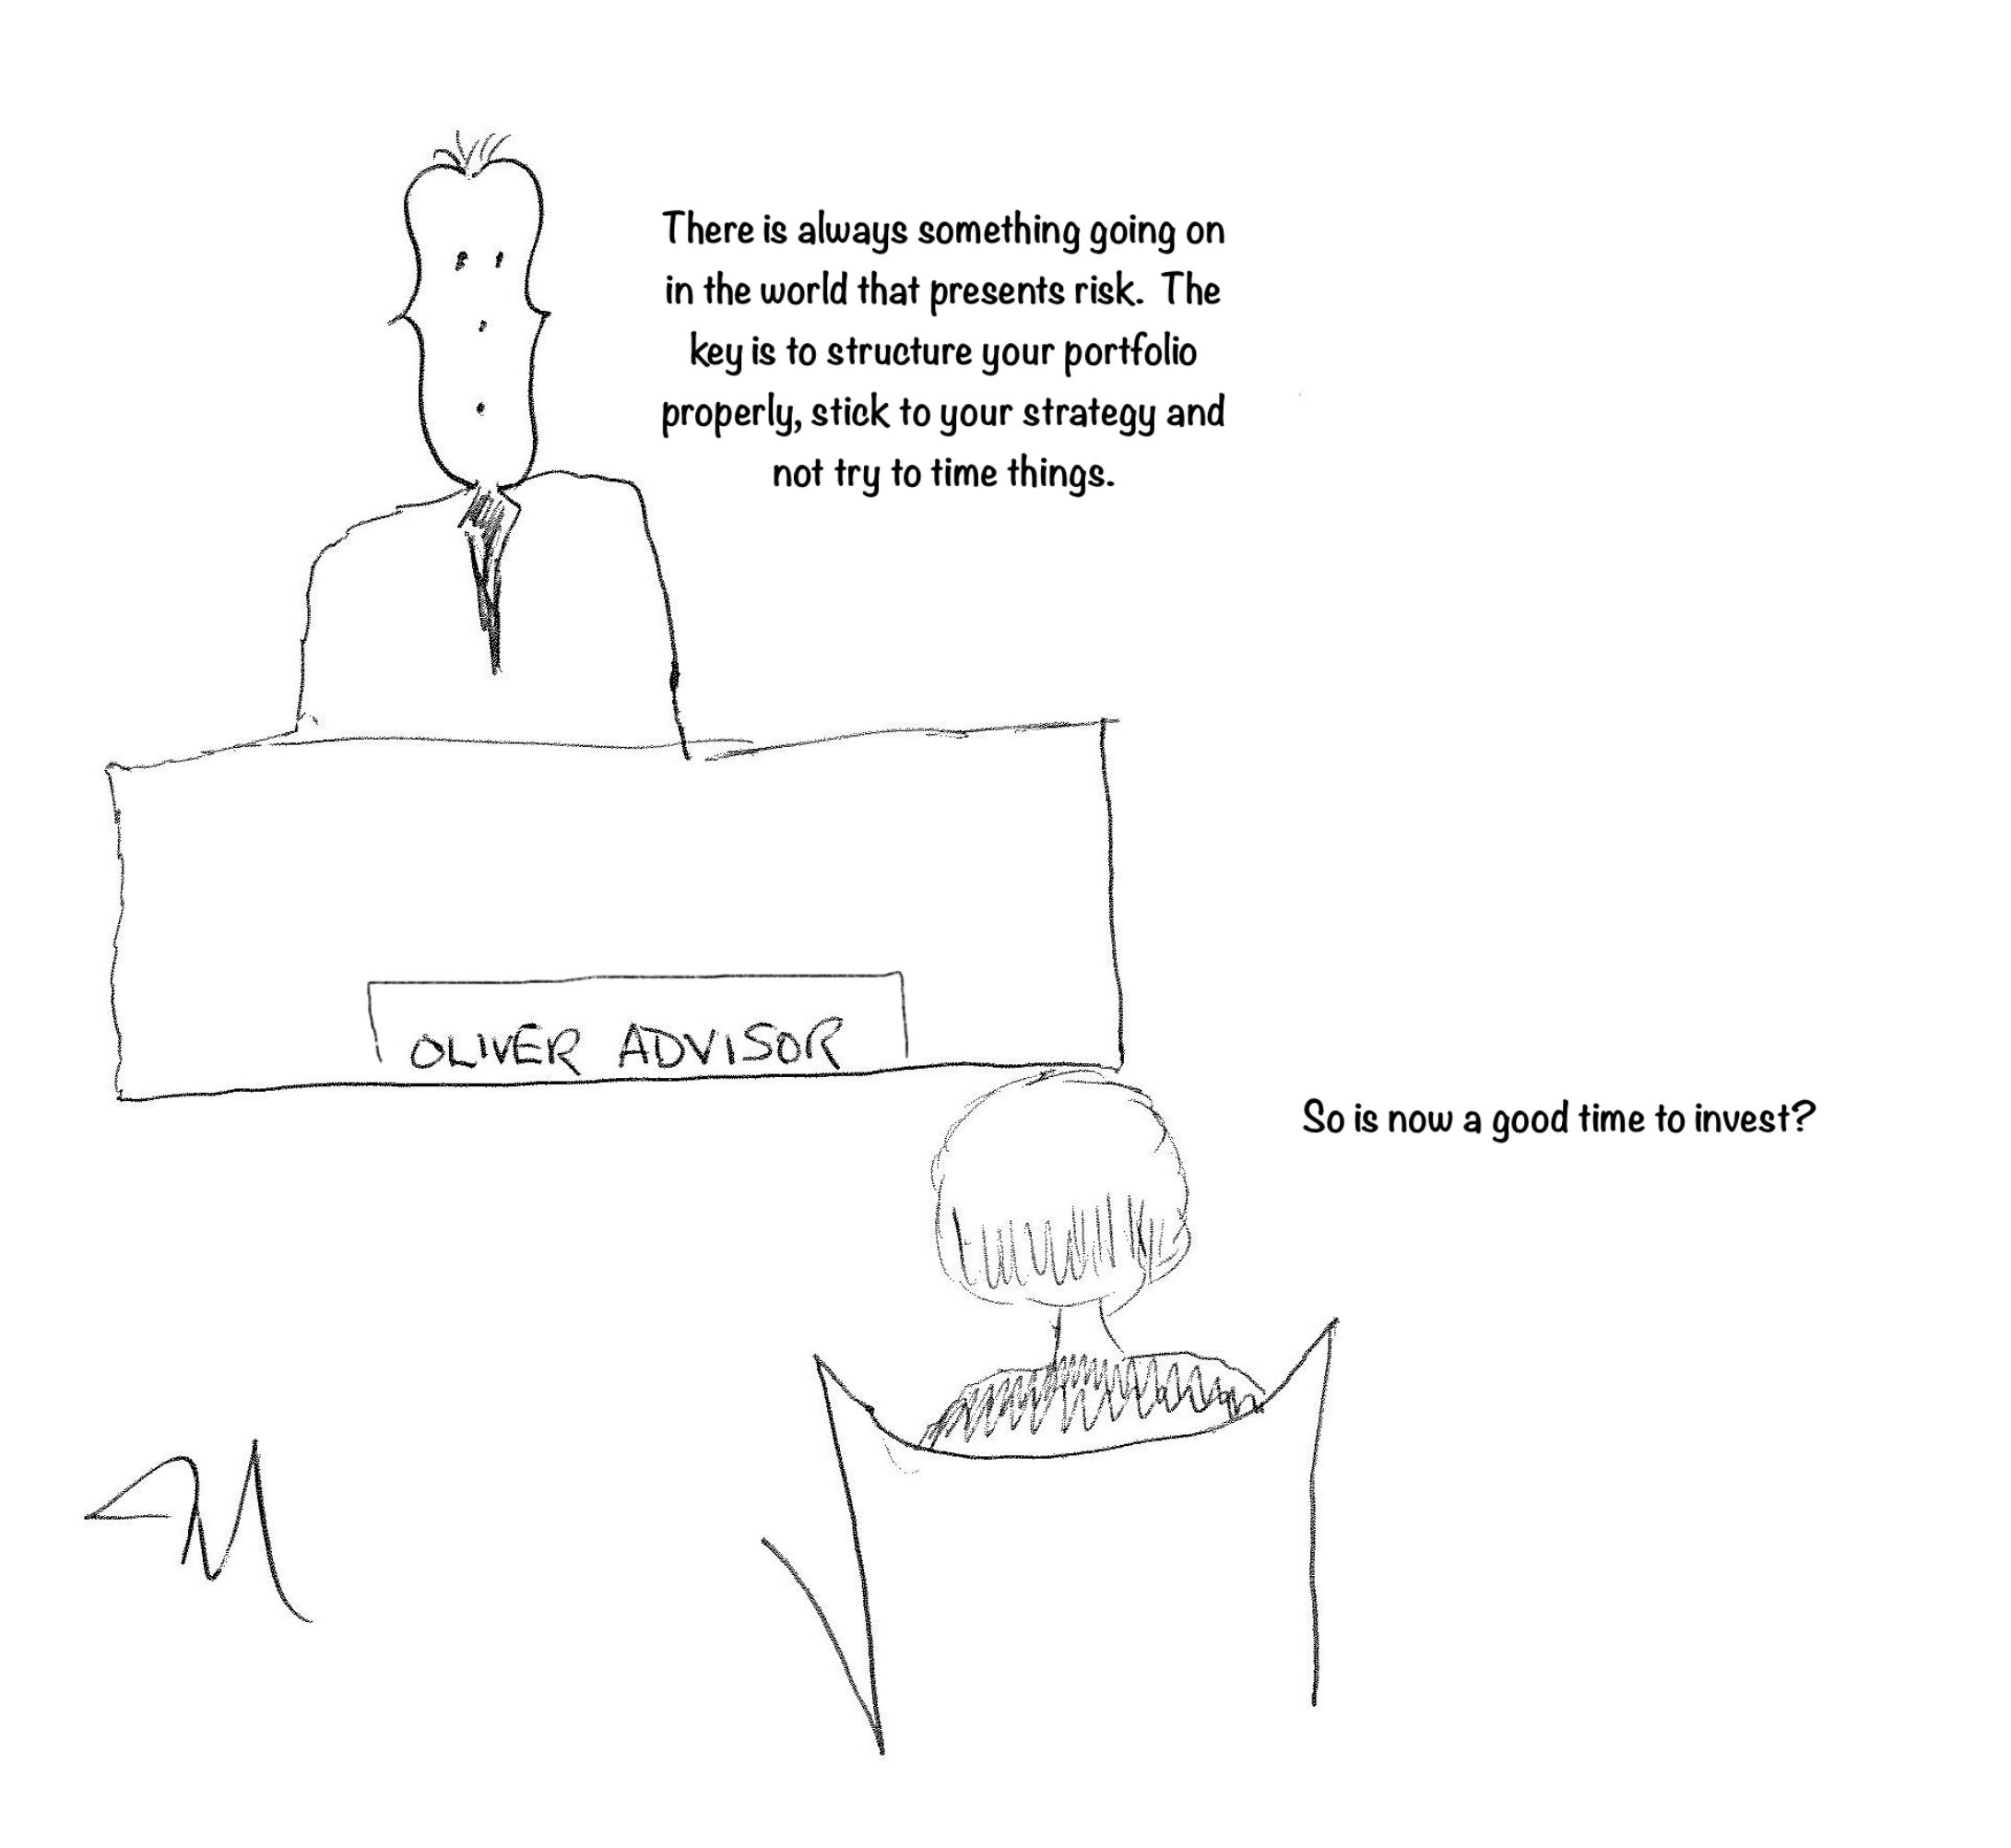 Cartoon drawing of a person asking an advisor if now is a good time to invest their money